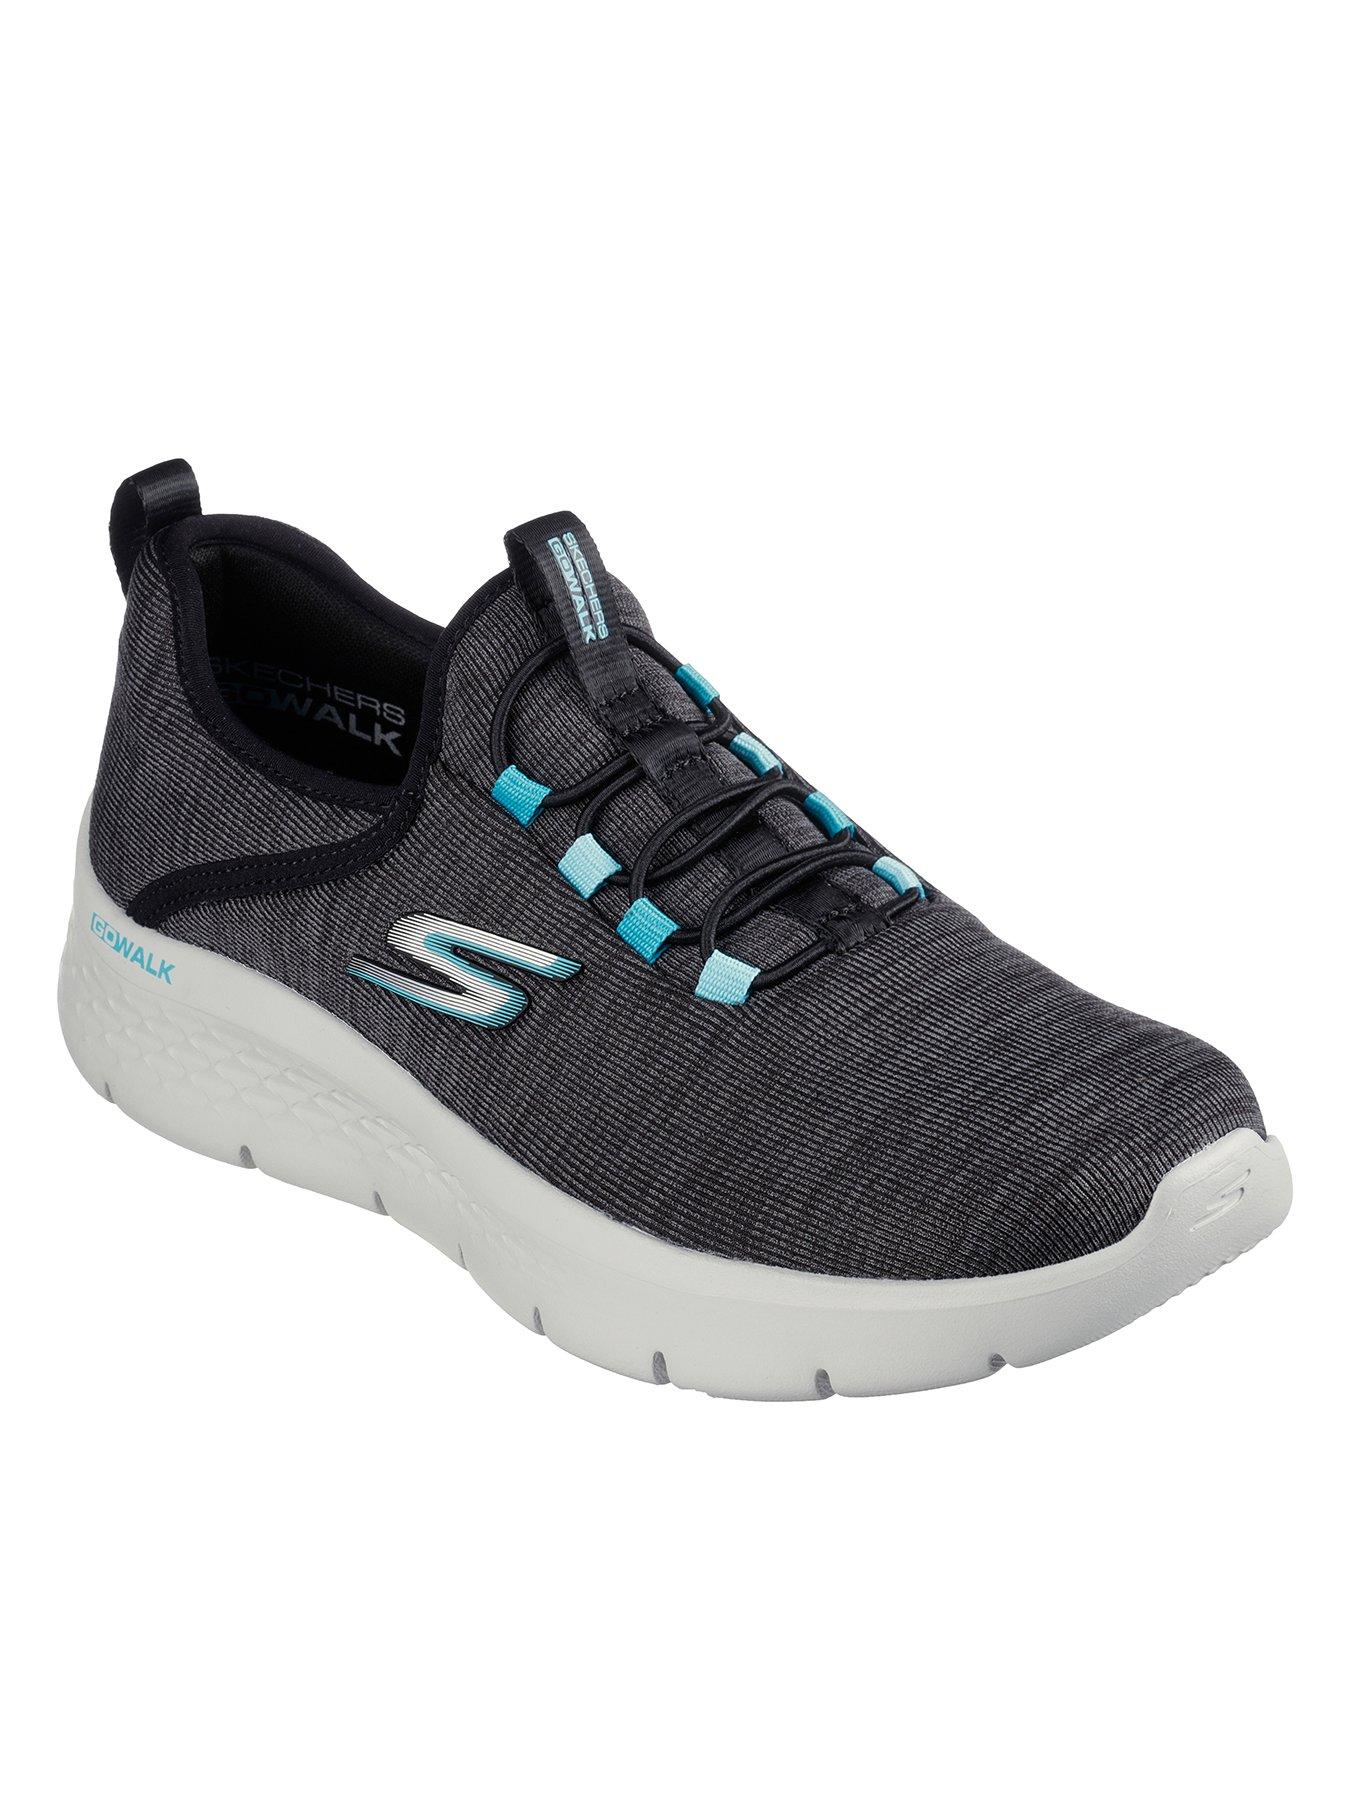 Skechers Ireland on X: Classic air cushioned style meets updated